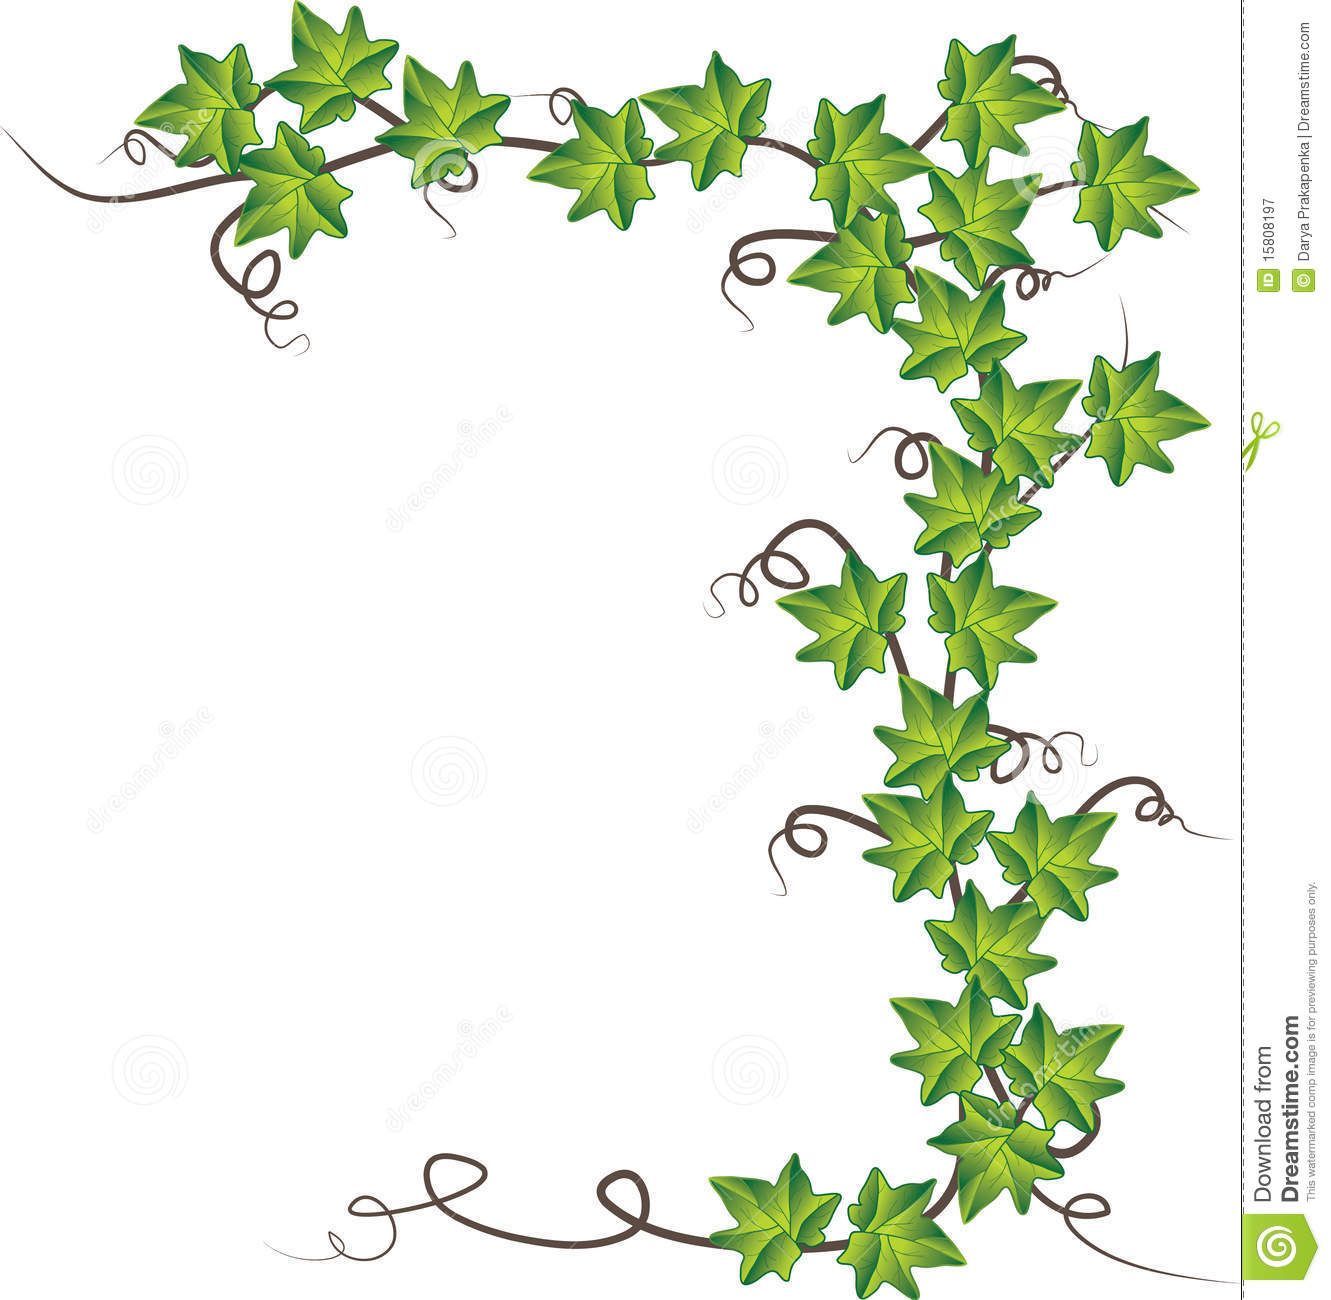 ivy clipart english ivy